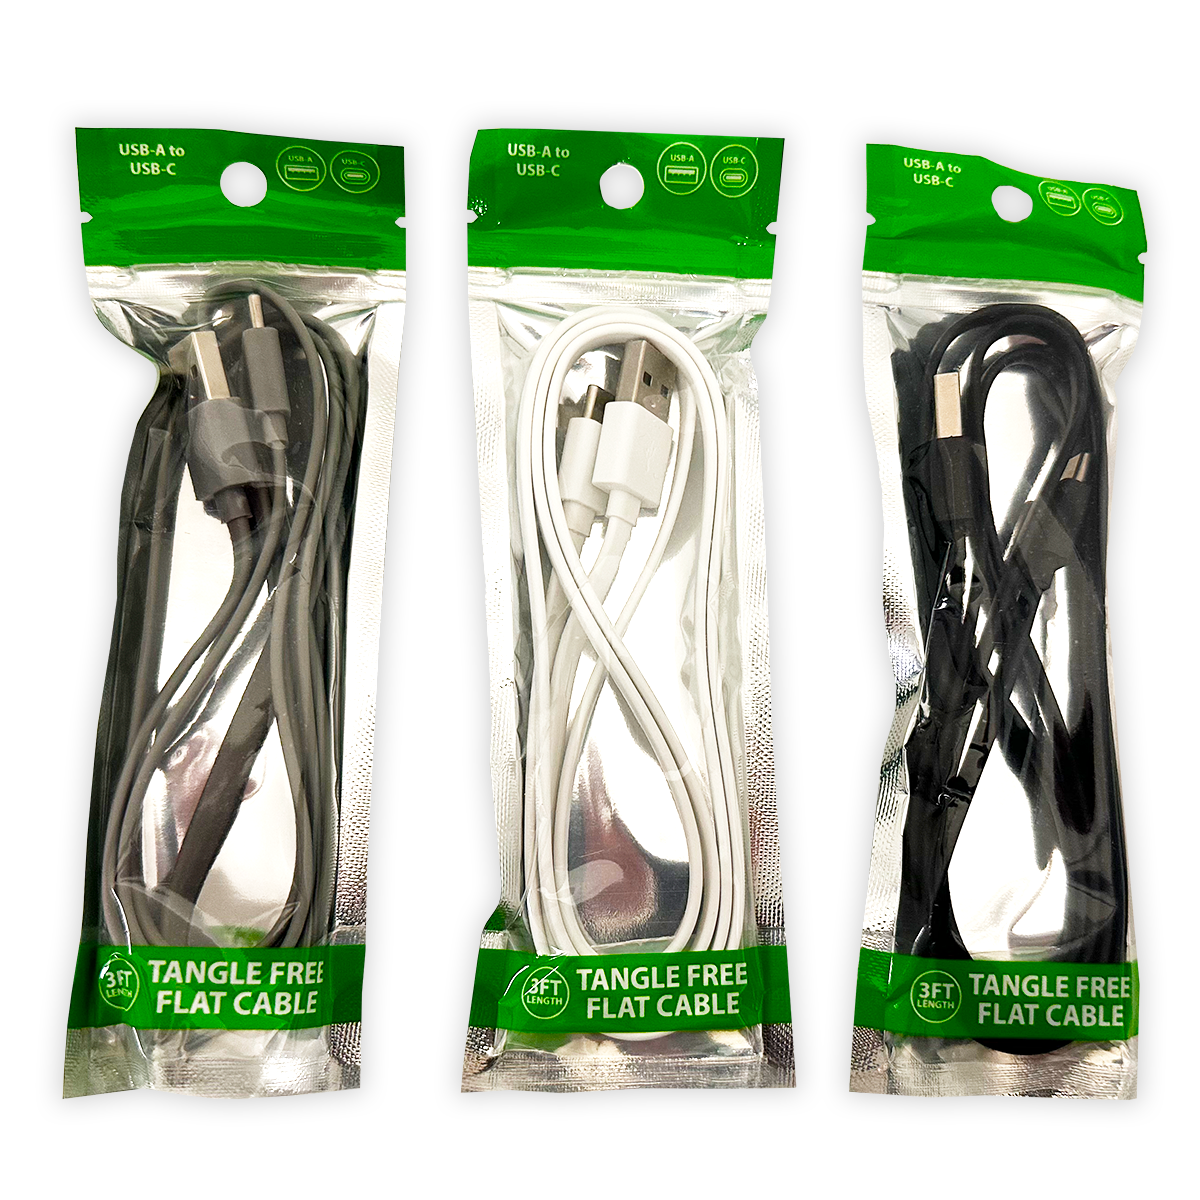 ITEM NUMBER 024463 3FT BULK USB-A TO USB-C SYNC & CHARGE CABLE 20 PIECES PER PACK